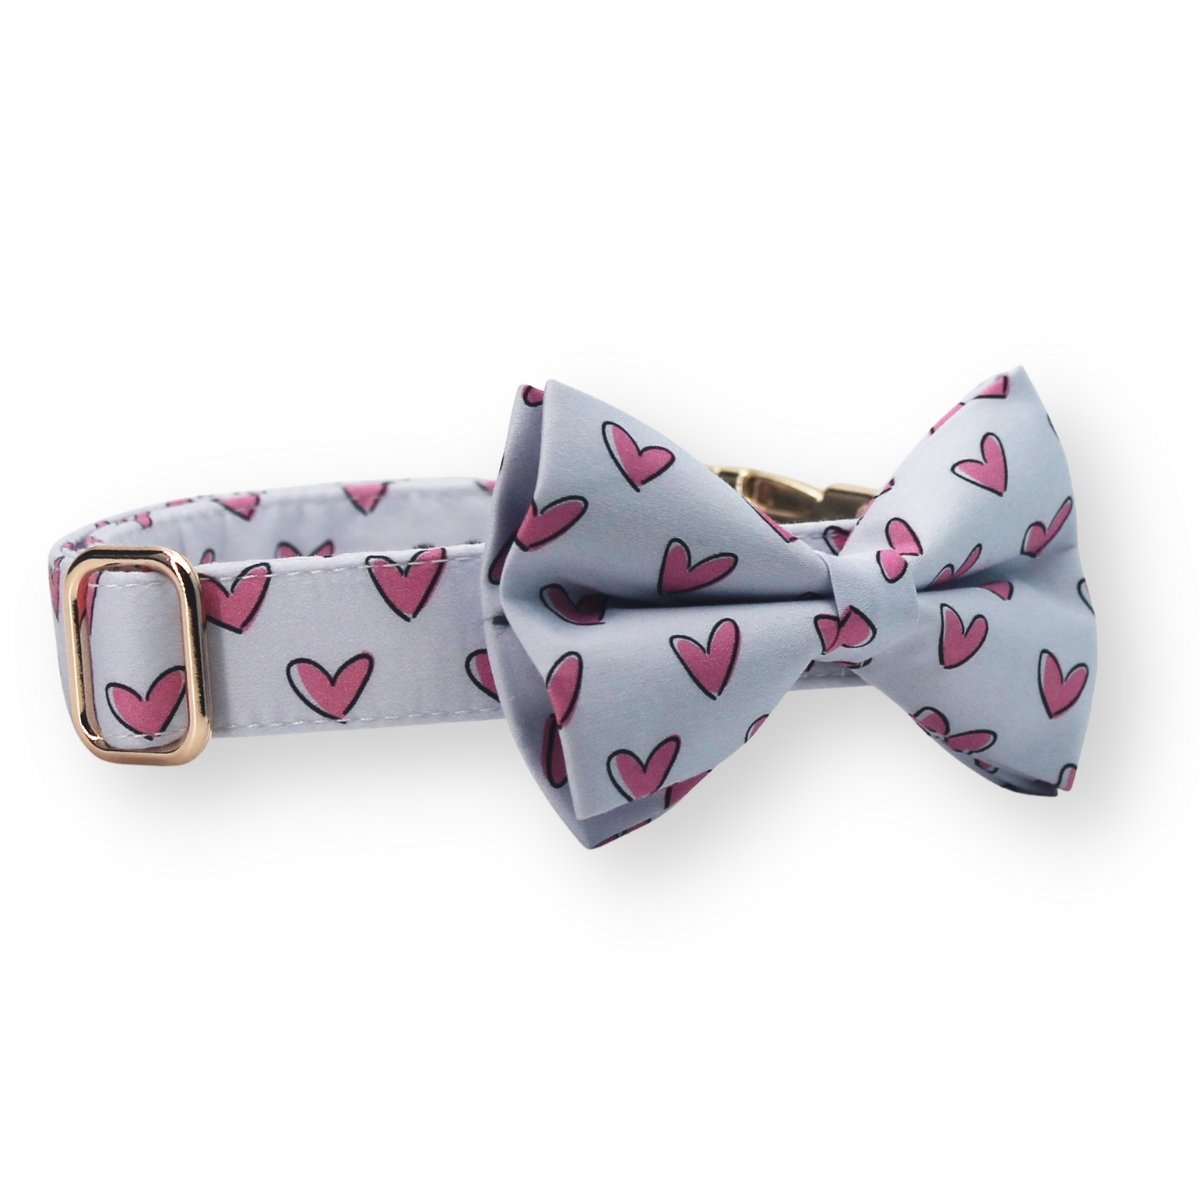 Cute & Super Safe Hardware Buckle Collar with Adorable Detachable Bows.  Beautiful Bowties Designs